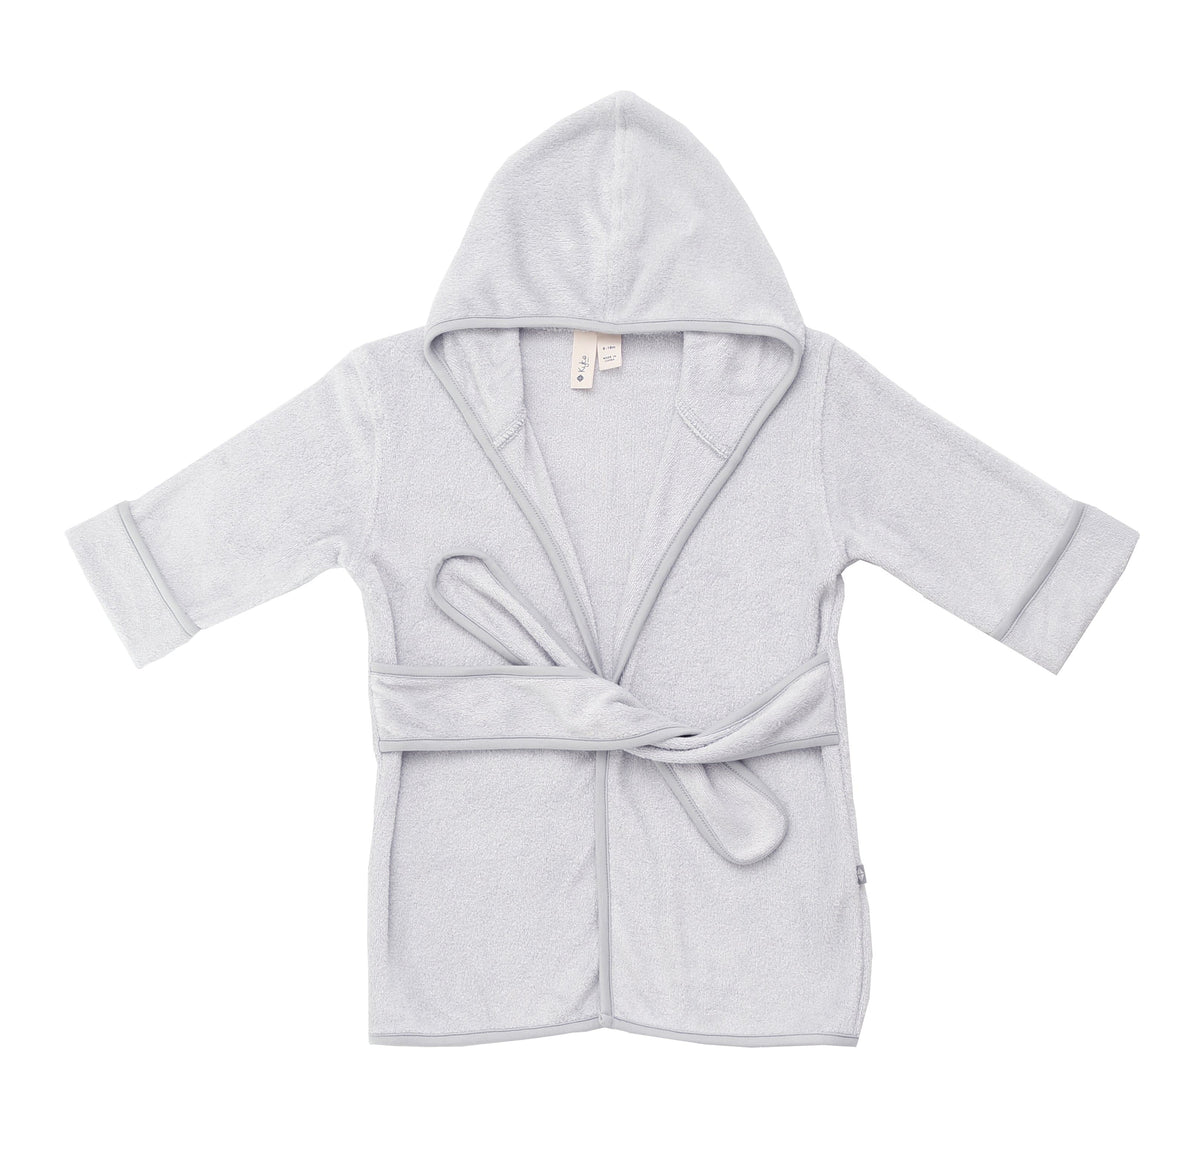 Kyte Baby Home and Bath Toddler Bath Robe in Storm